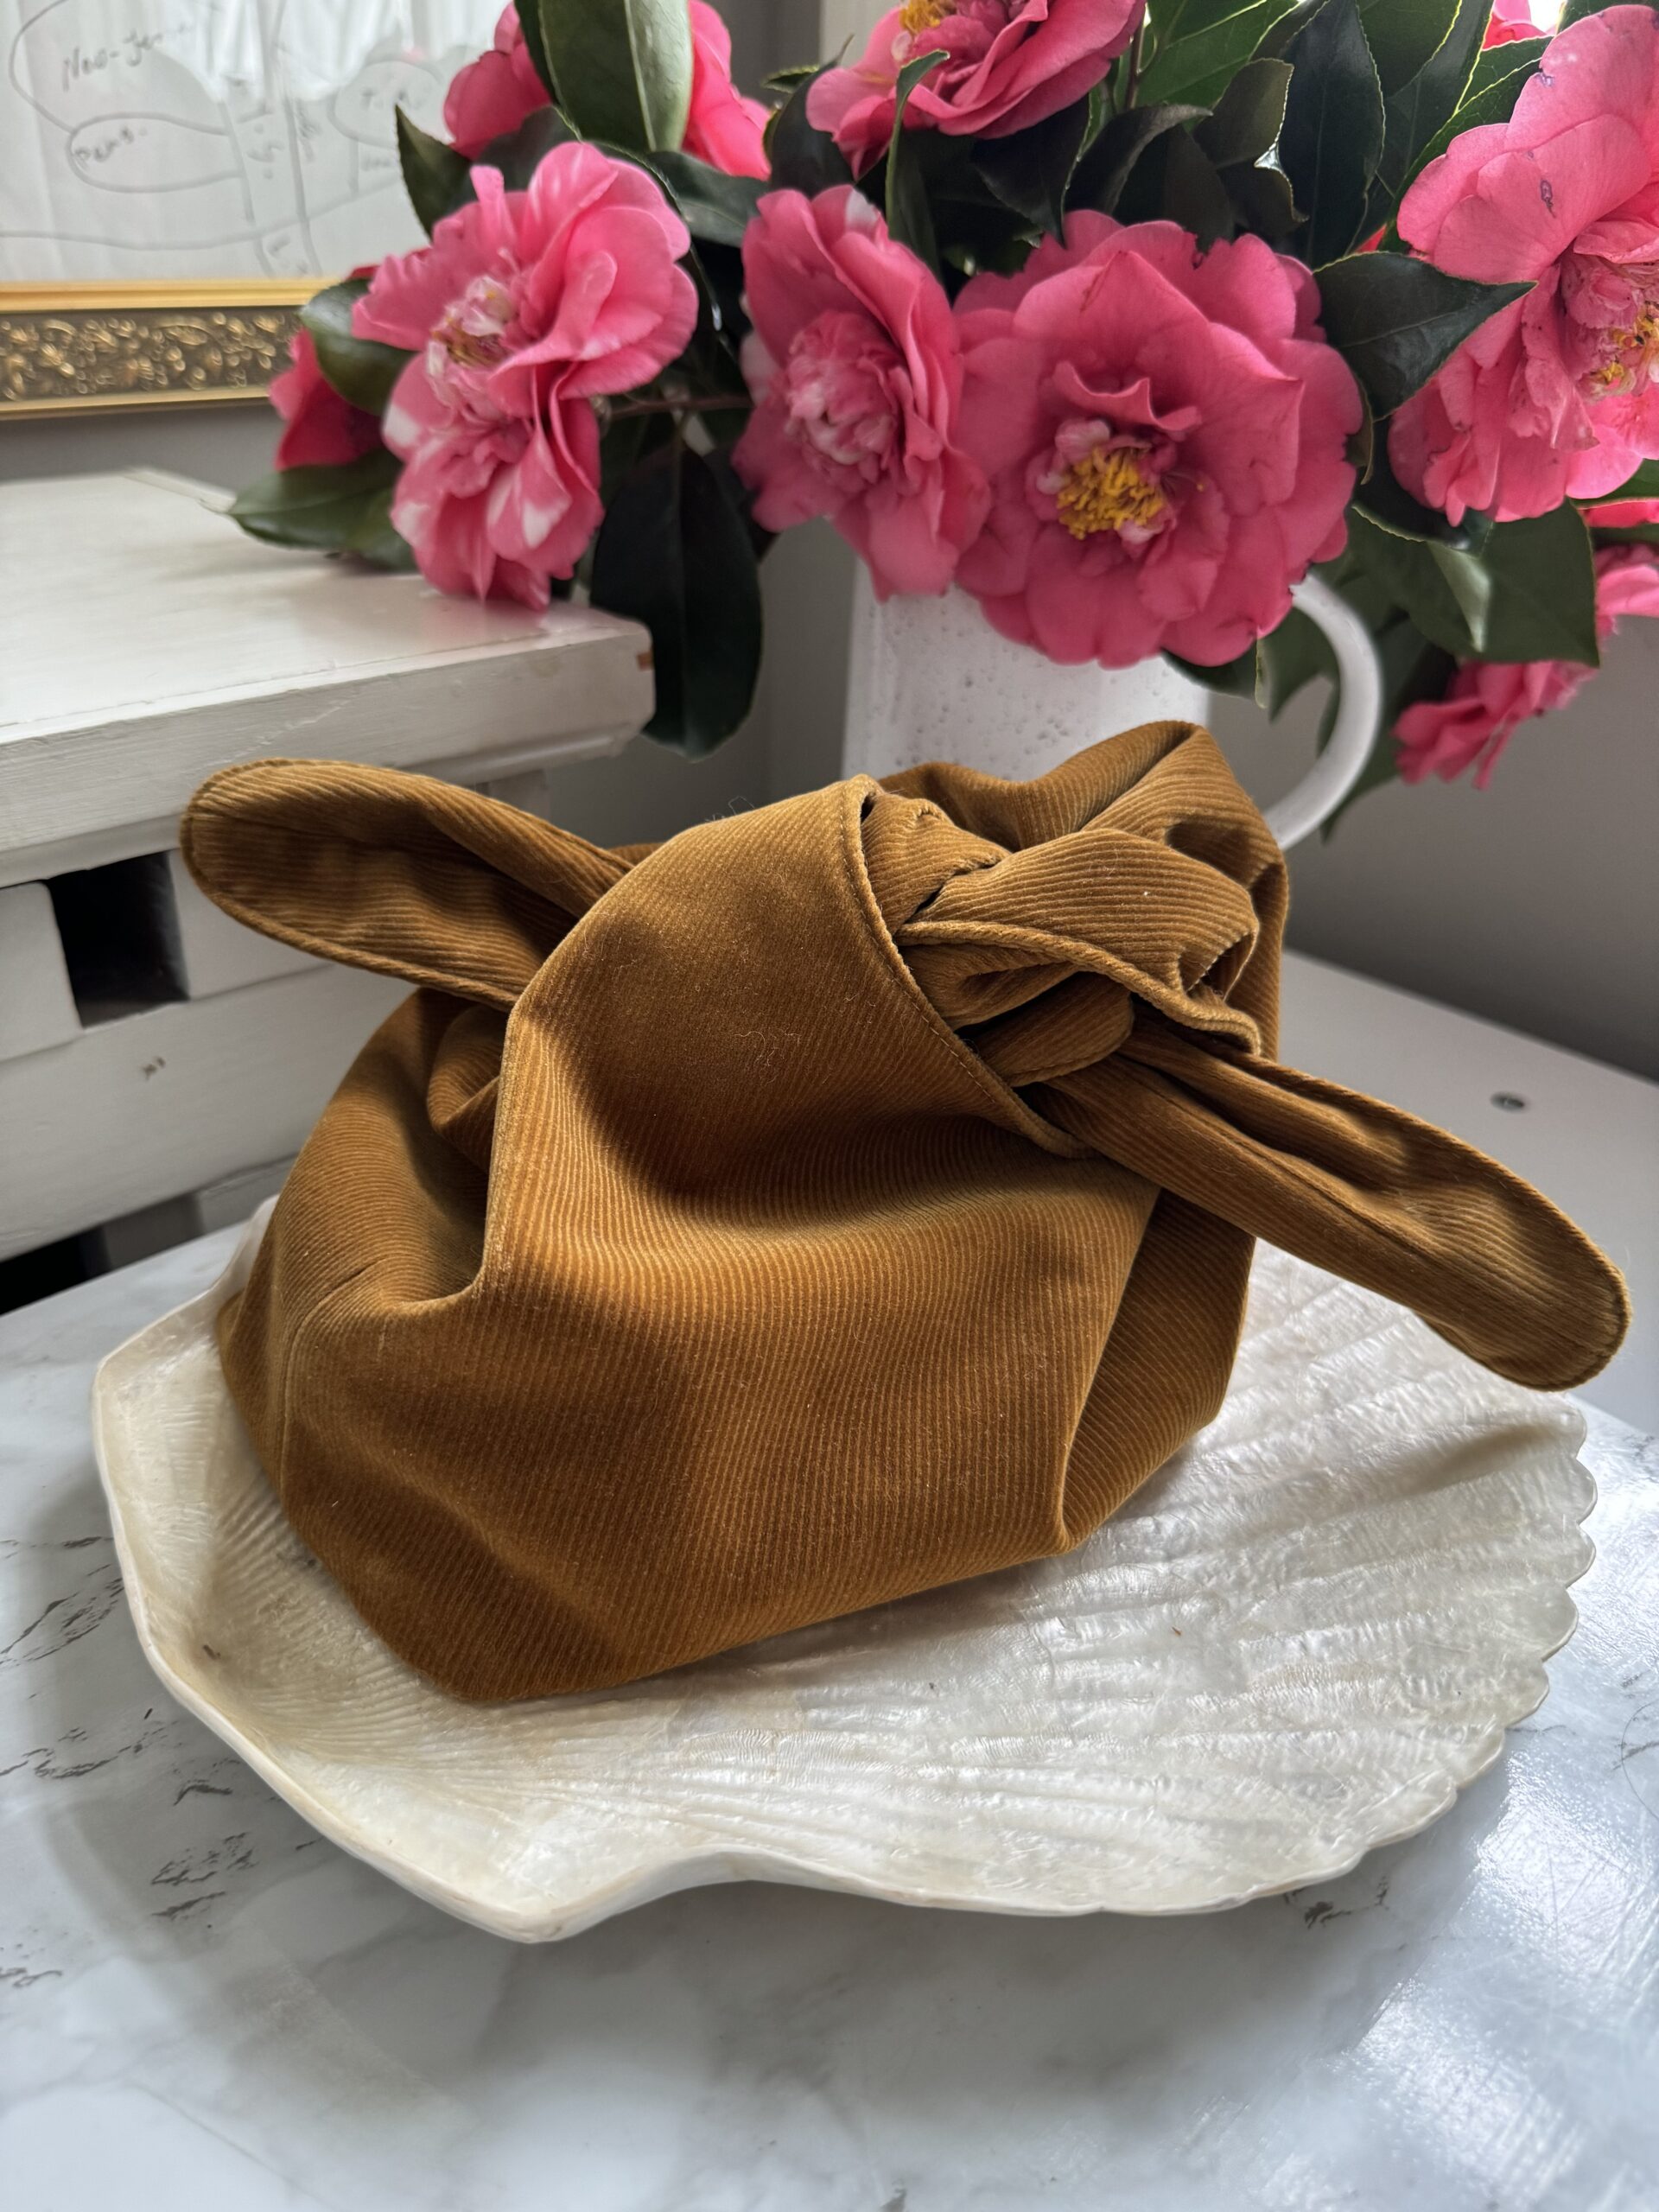 A mustard yellow fabric pouch with a knot, resting on a white decorative plate, next to pink flowers.